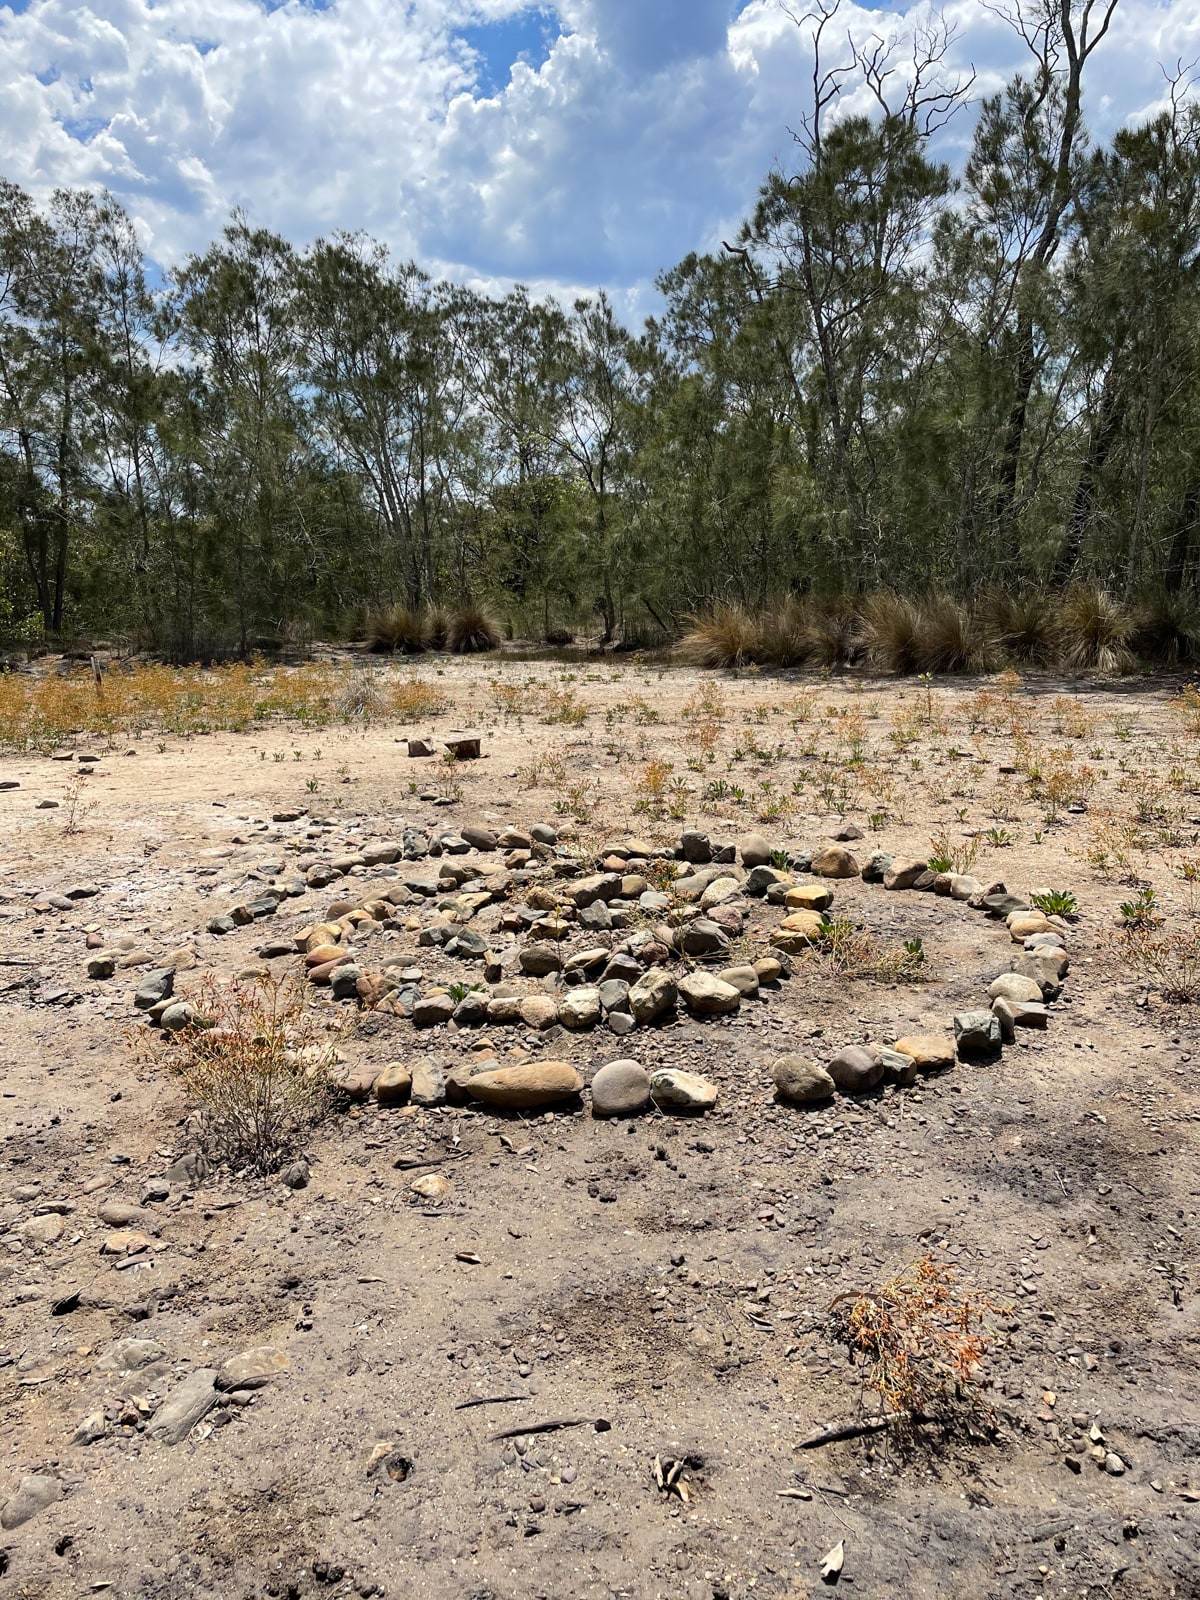 A number of small rocks arranged in a circle, on an open dirt area in a desolate place